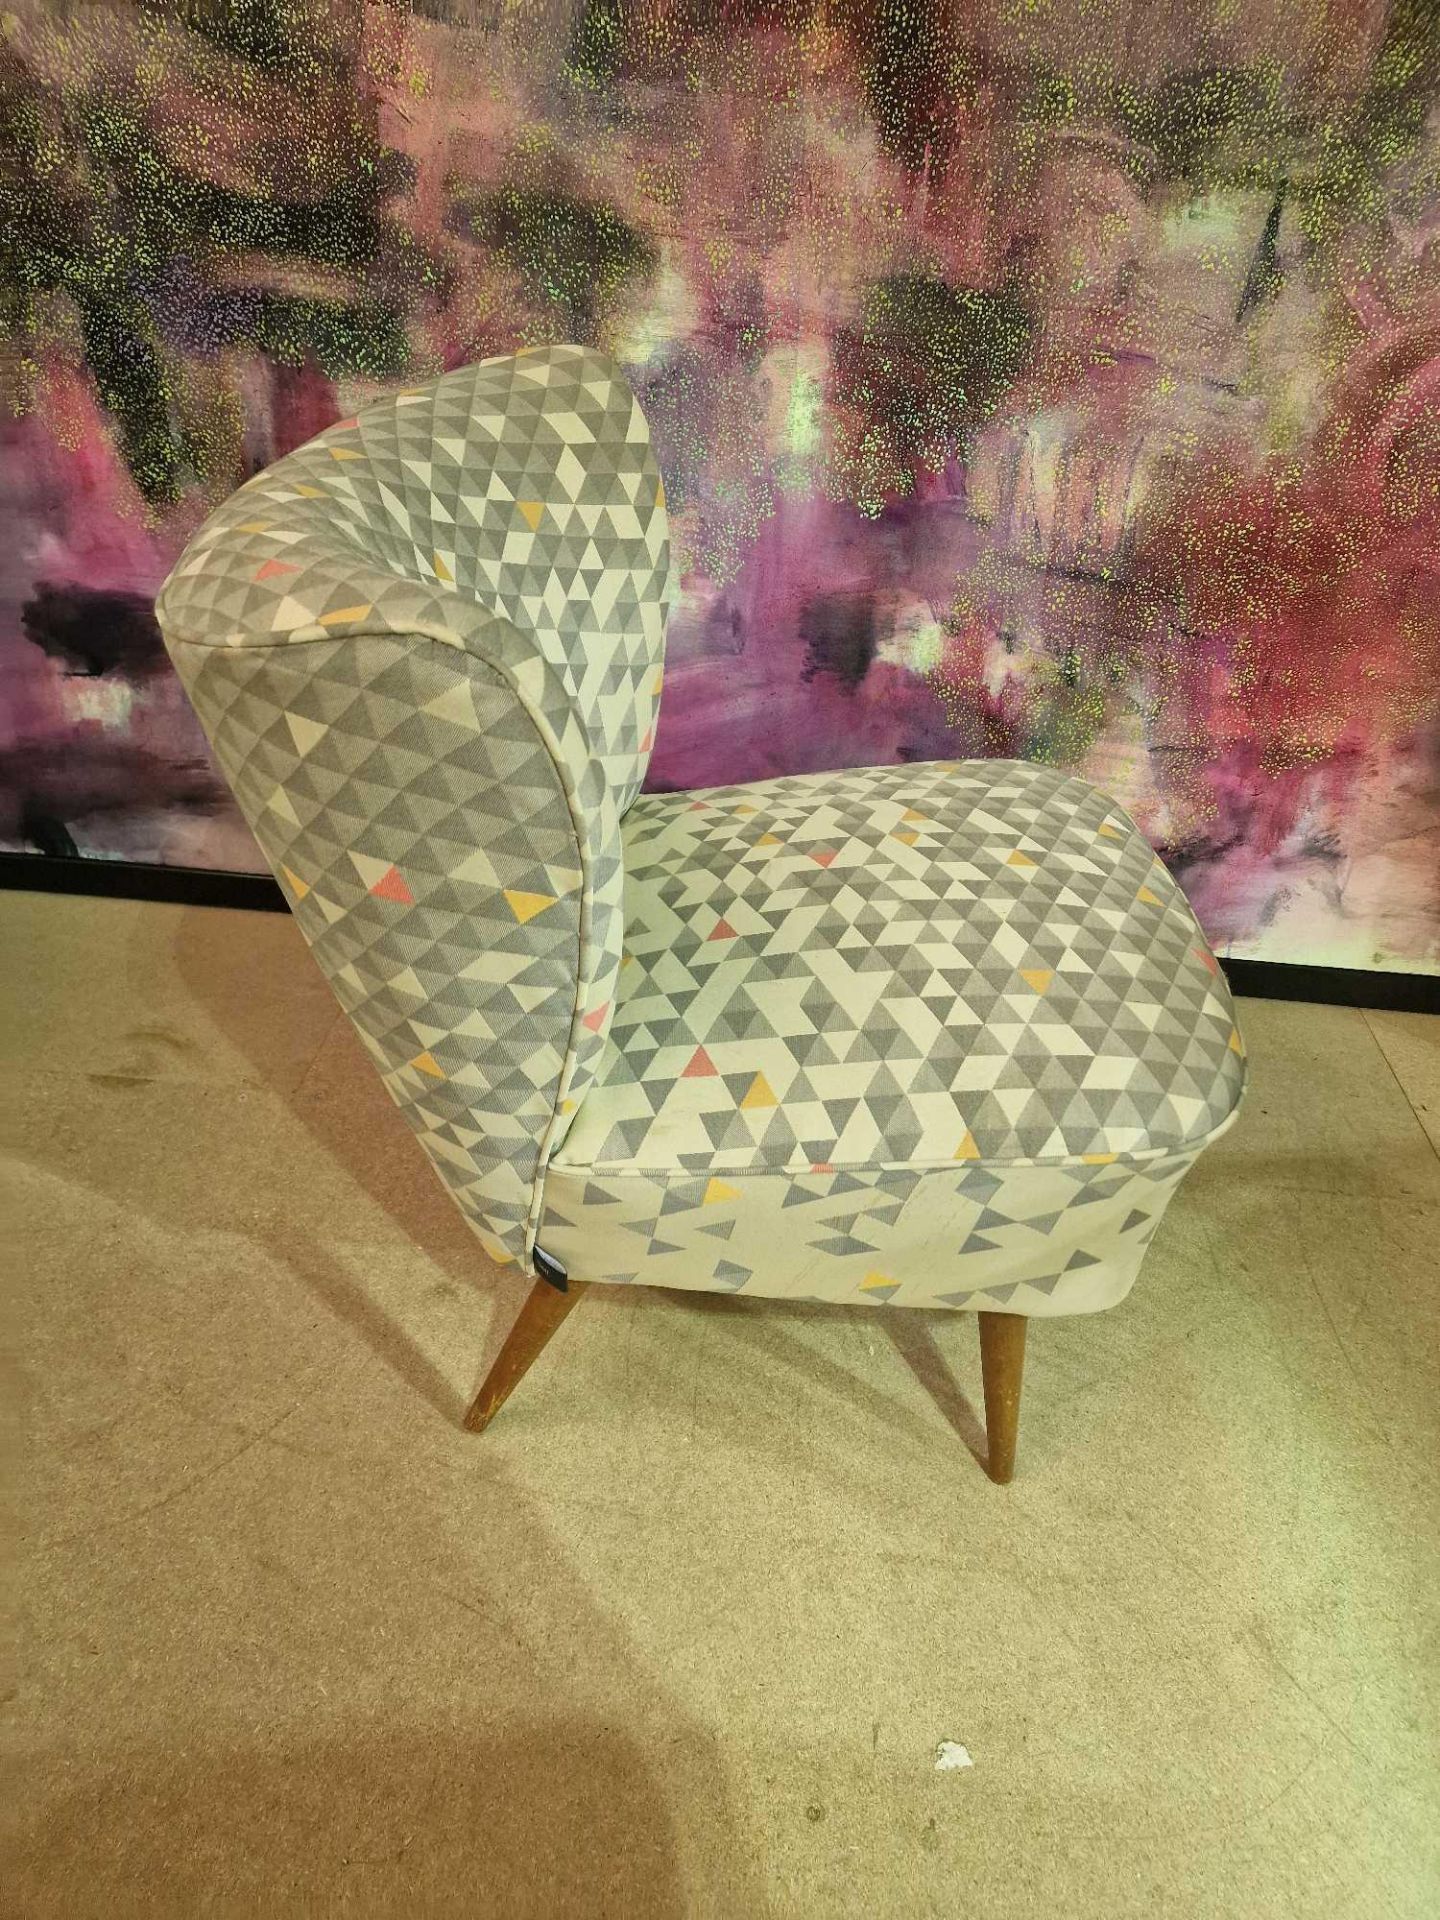 Slipper chair by Self Style Steeped in luxury, the geometric pattern upholstered chair is an elegant - Bild 2 aus 4